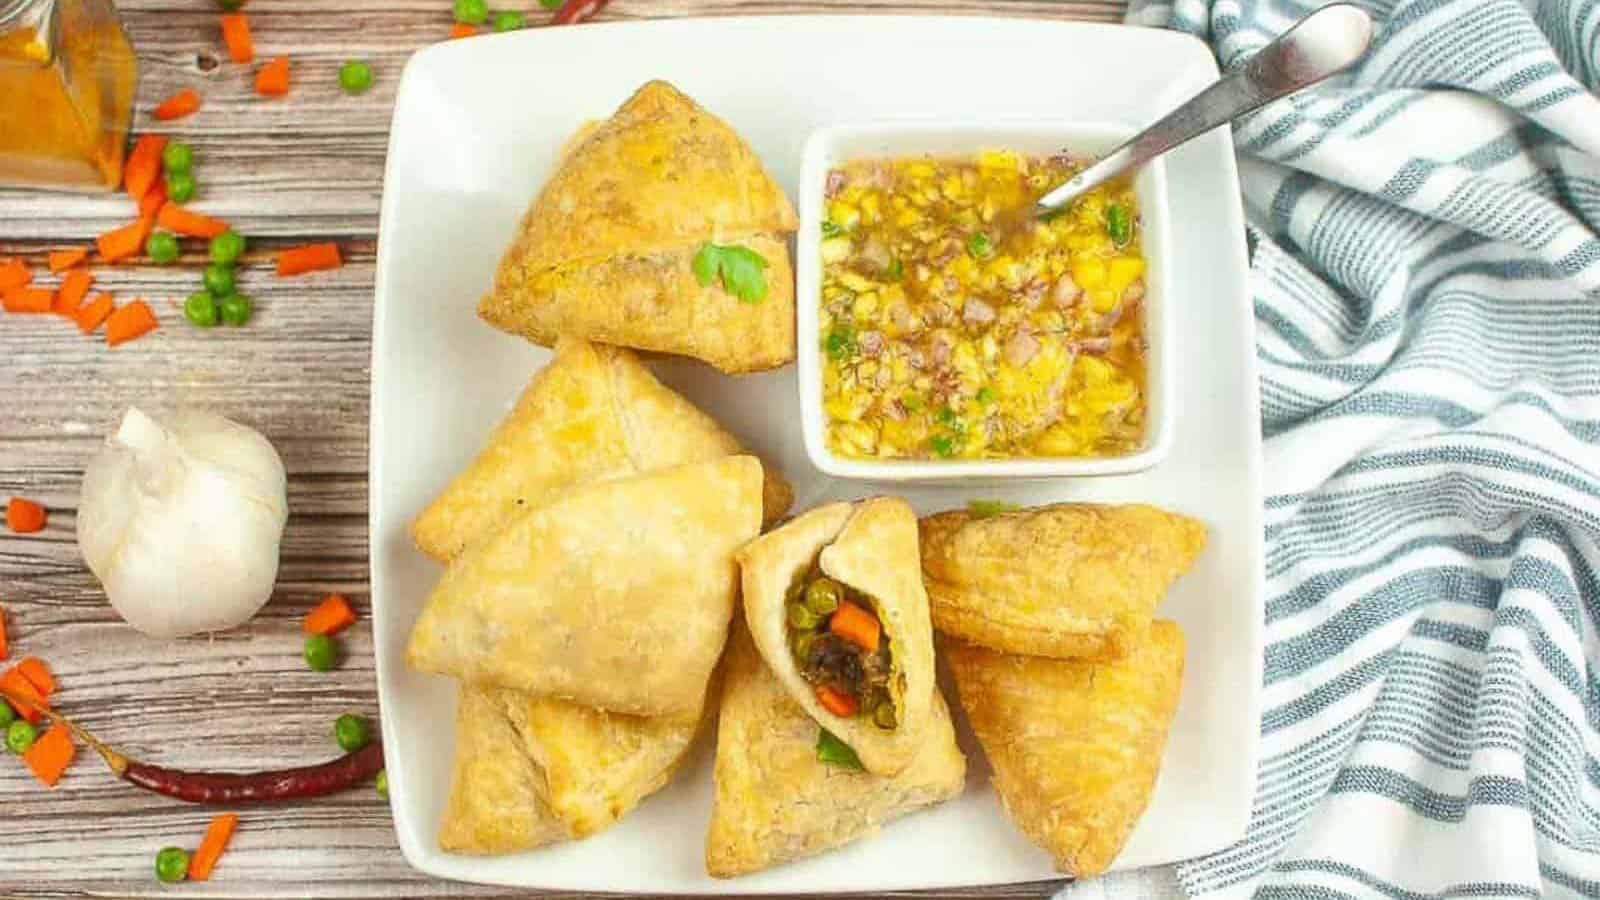 Overhead shot of a plate of samosas with raw mango chutney on the side for dipping.